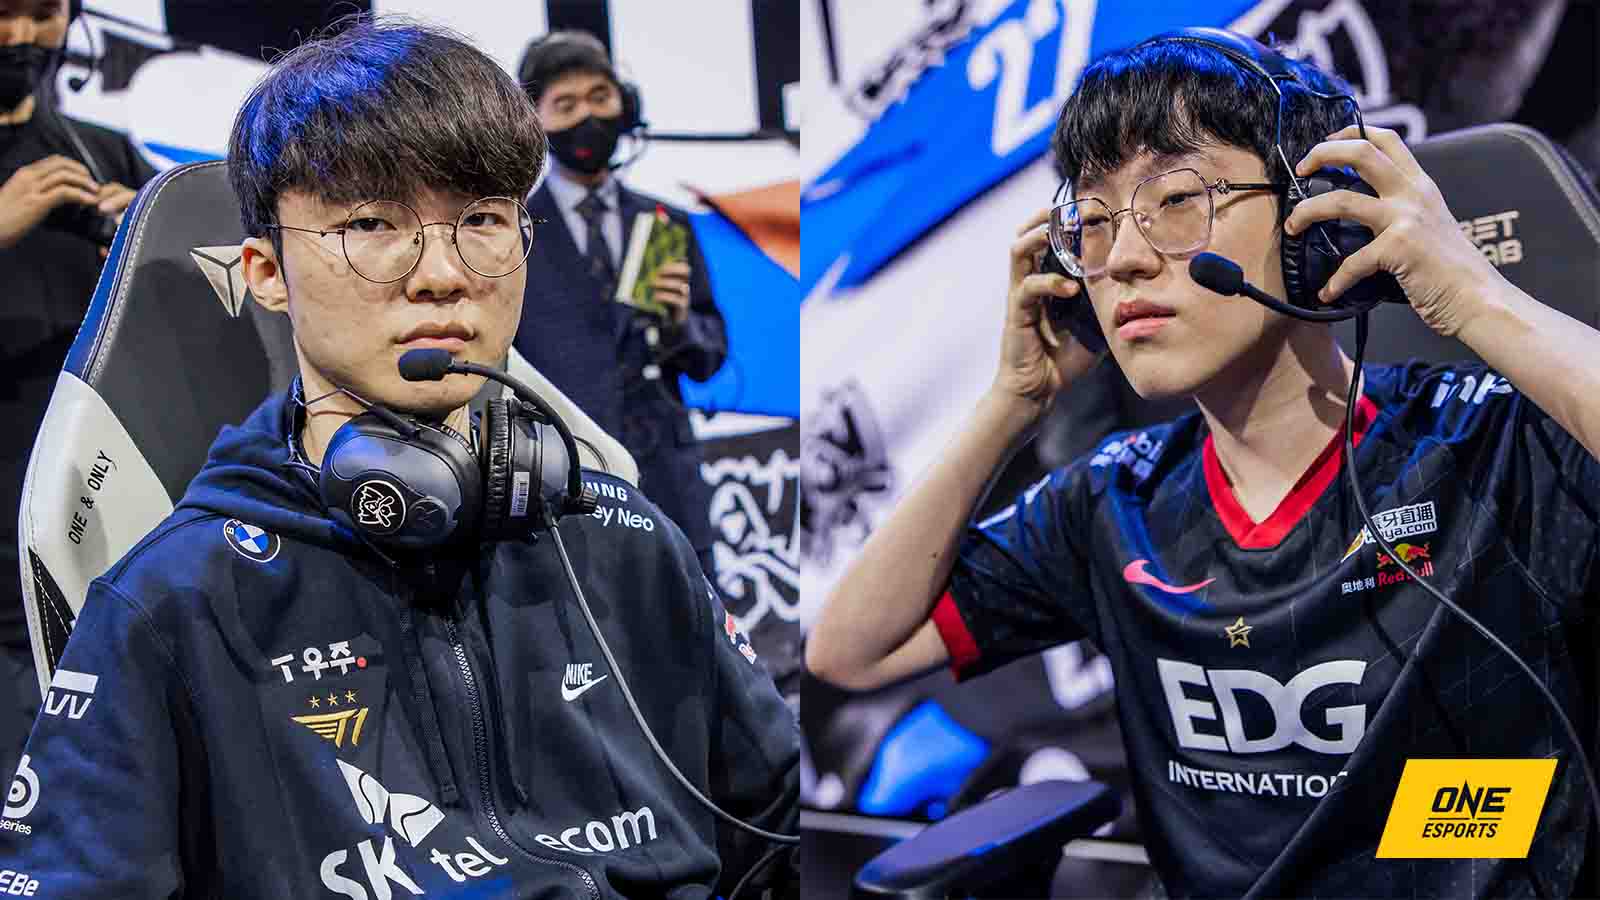 T1 Faker and EDG Scout on stage at Worlds 2022